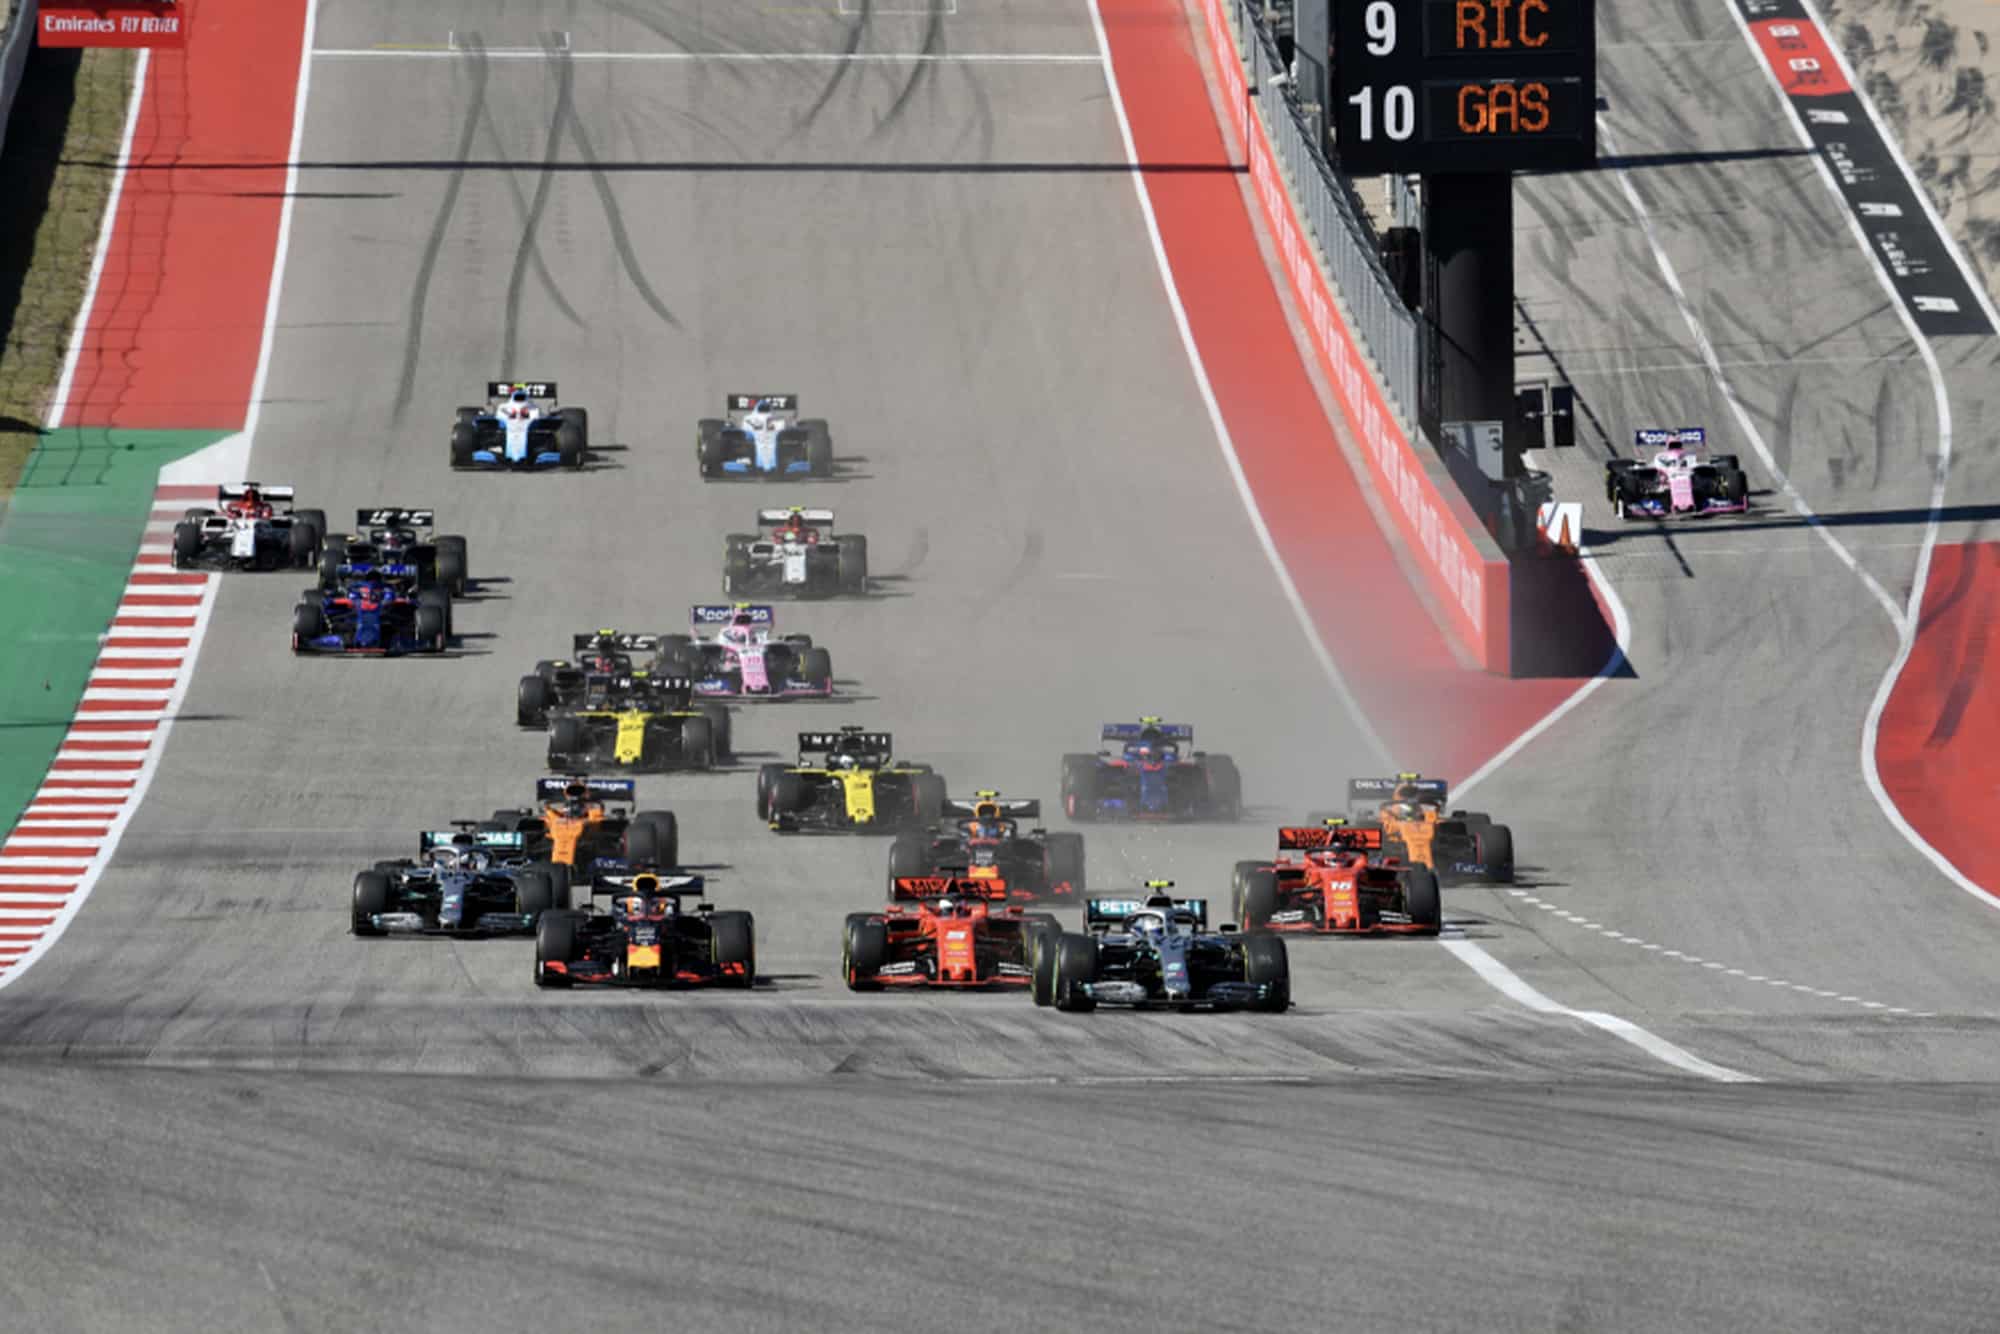 The start of the 2019 United States Grand Prix